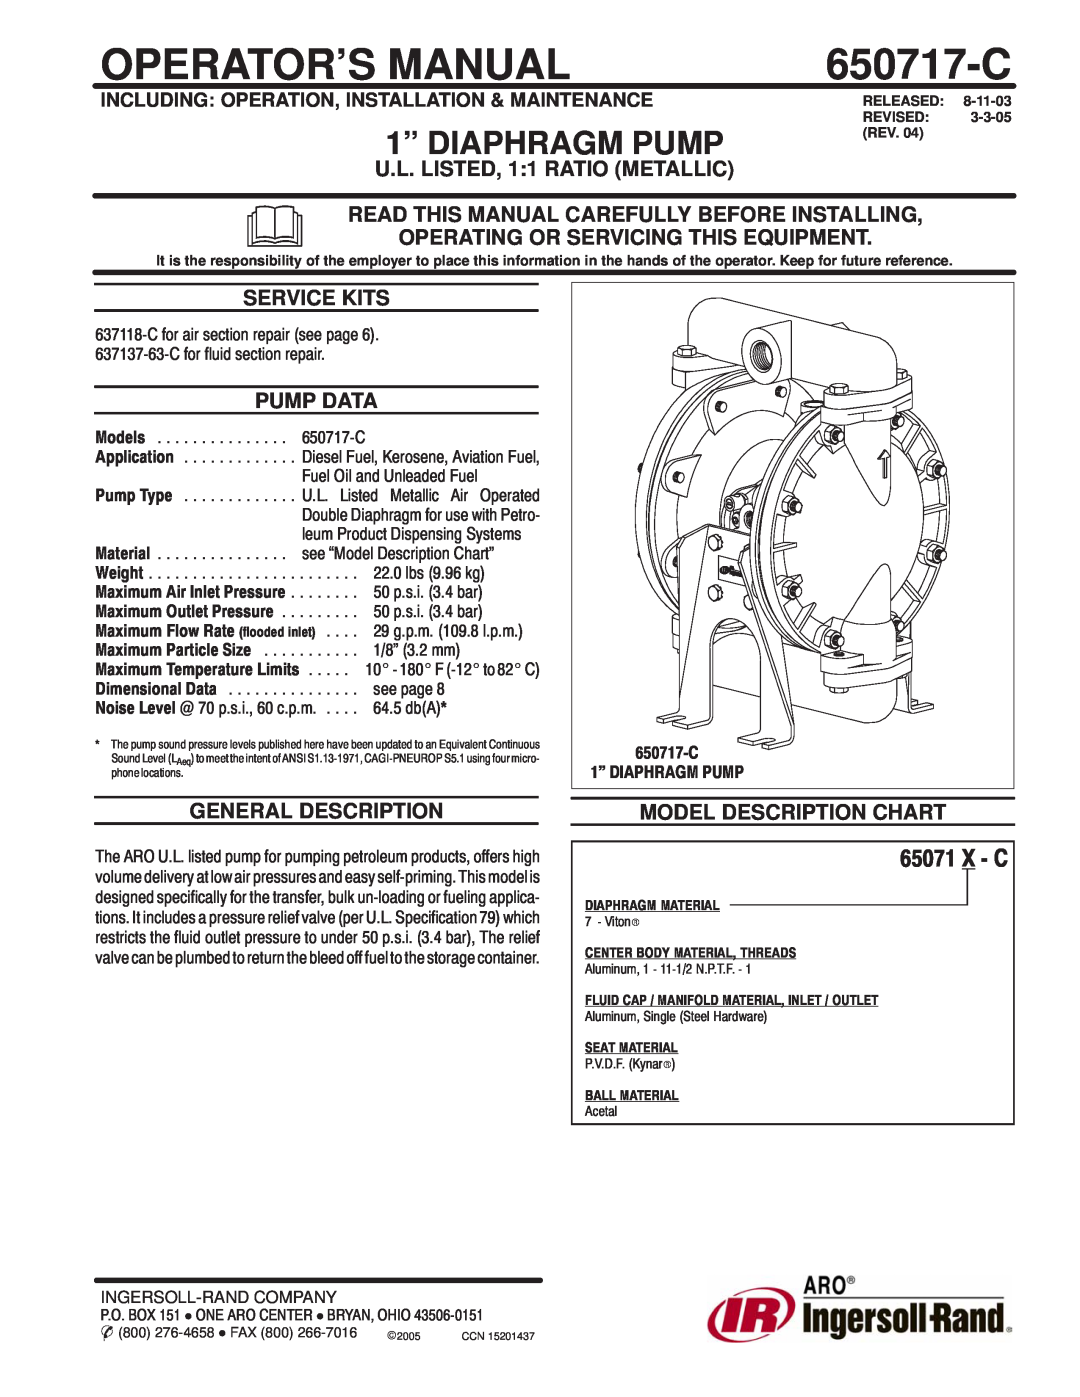 Ingersoll-Rand 650717-C manual U.L. LISTED, 11 RATIO METALLIC, Read This Manual Carefully Before Installing, E2005 